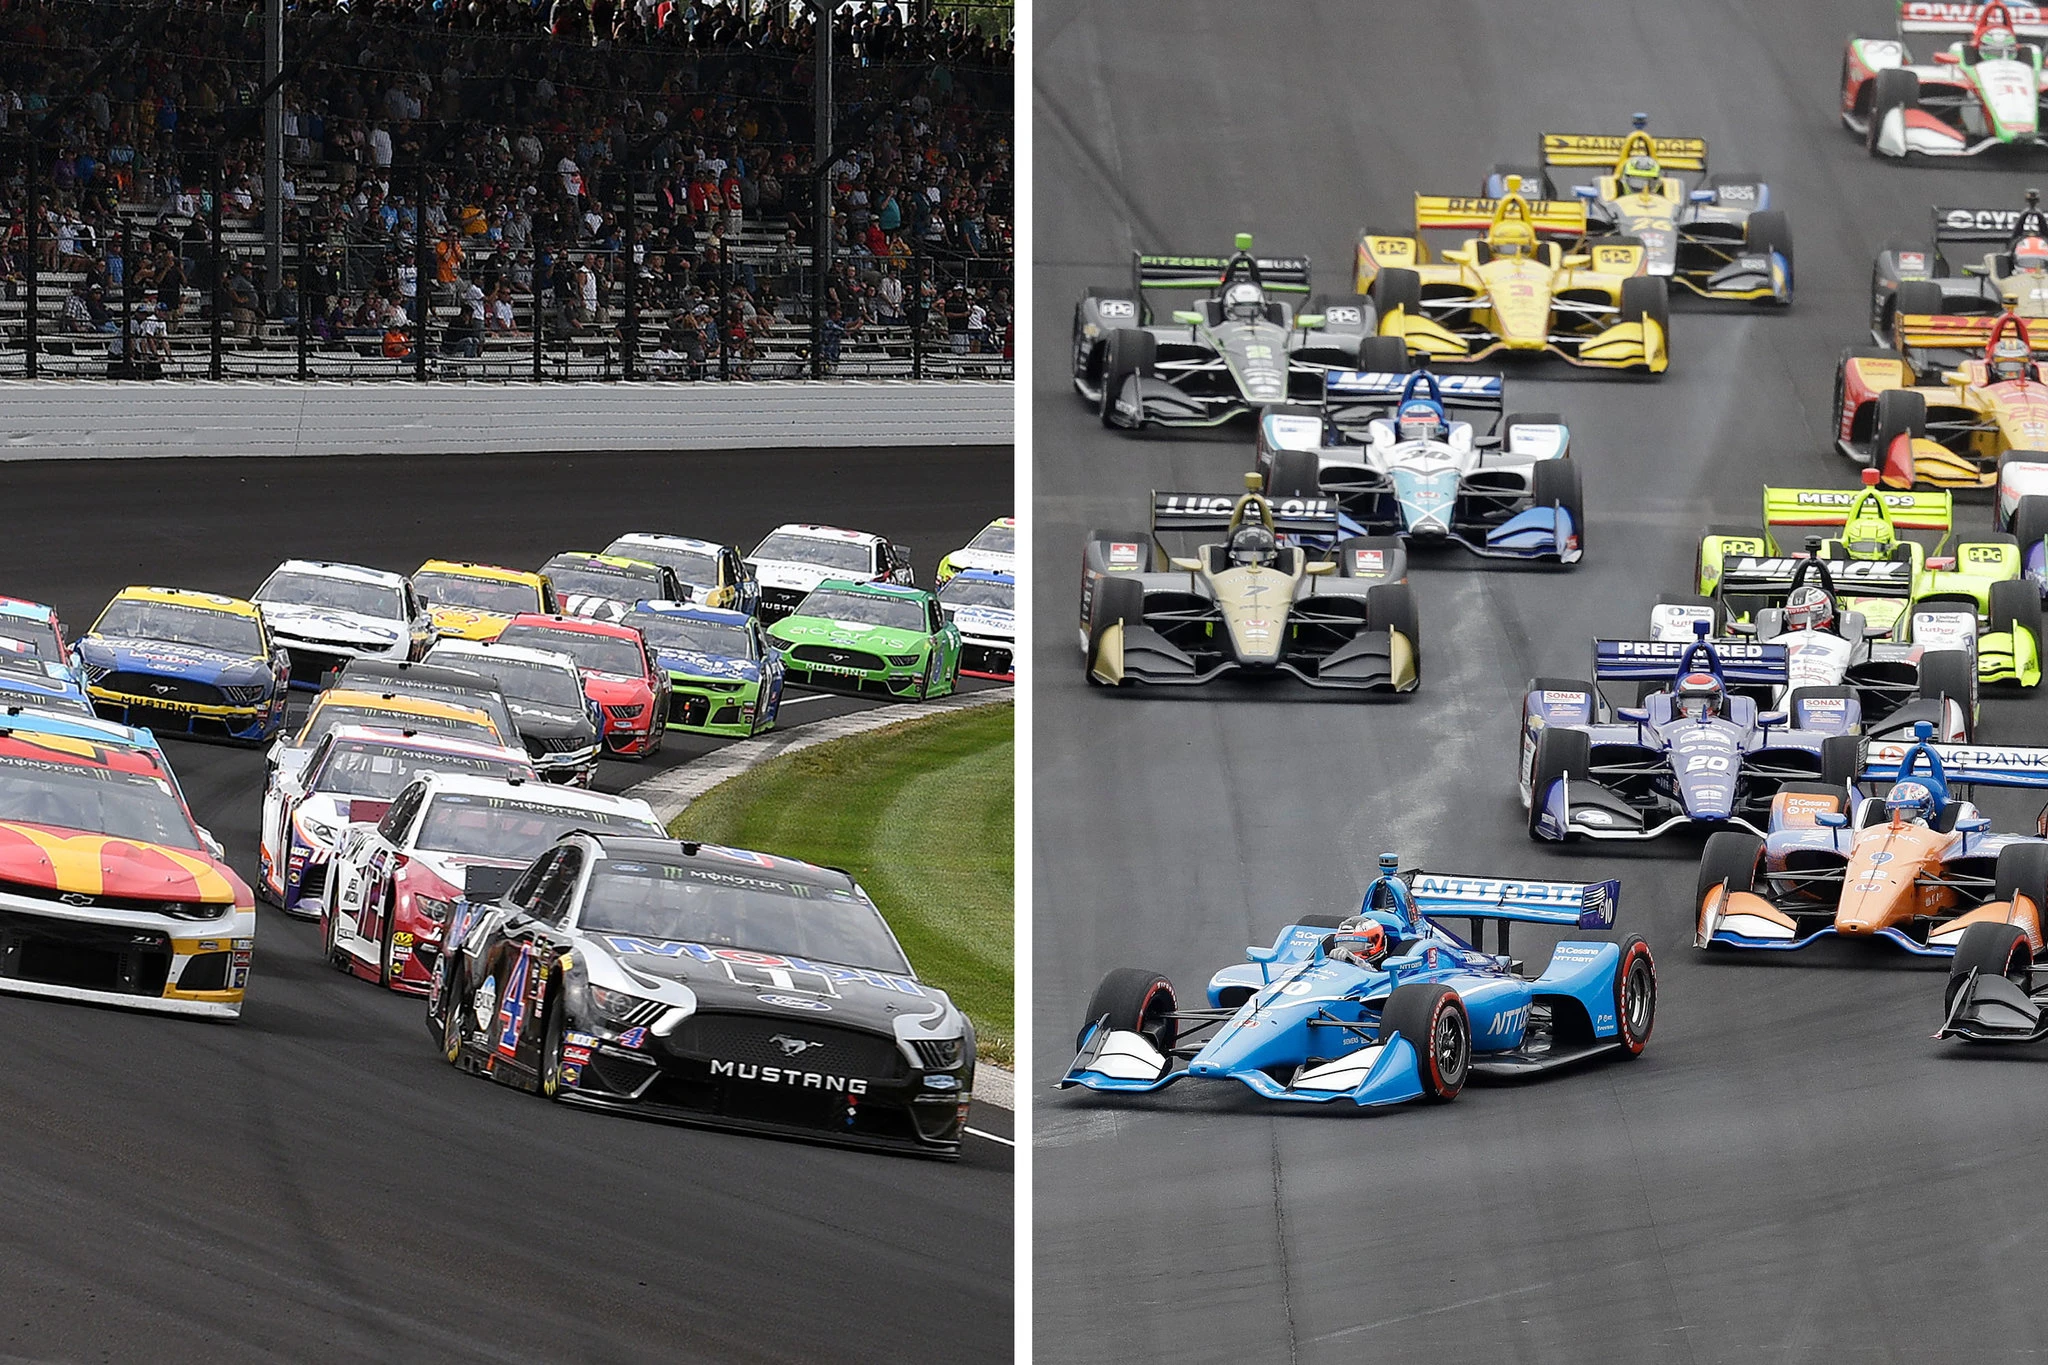 NASCAR stock car and IndyCar open wheel racing car competing on the track, representing the contrasting styles of closed wheel and open wheel racing.